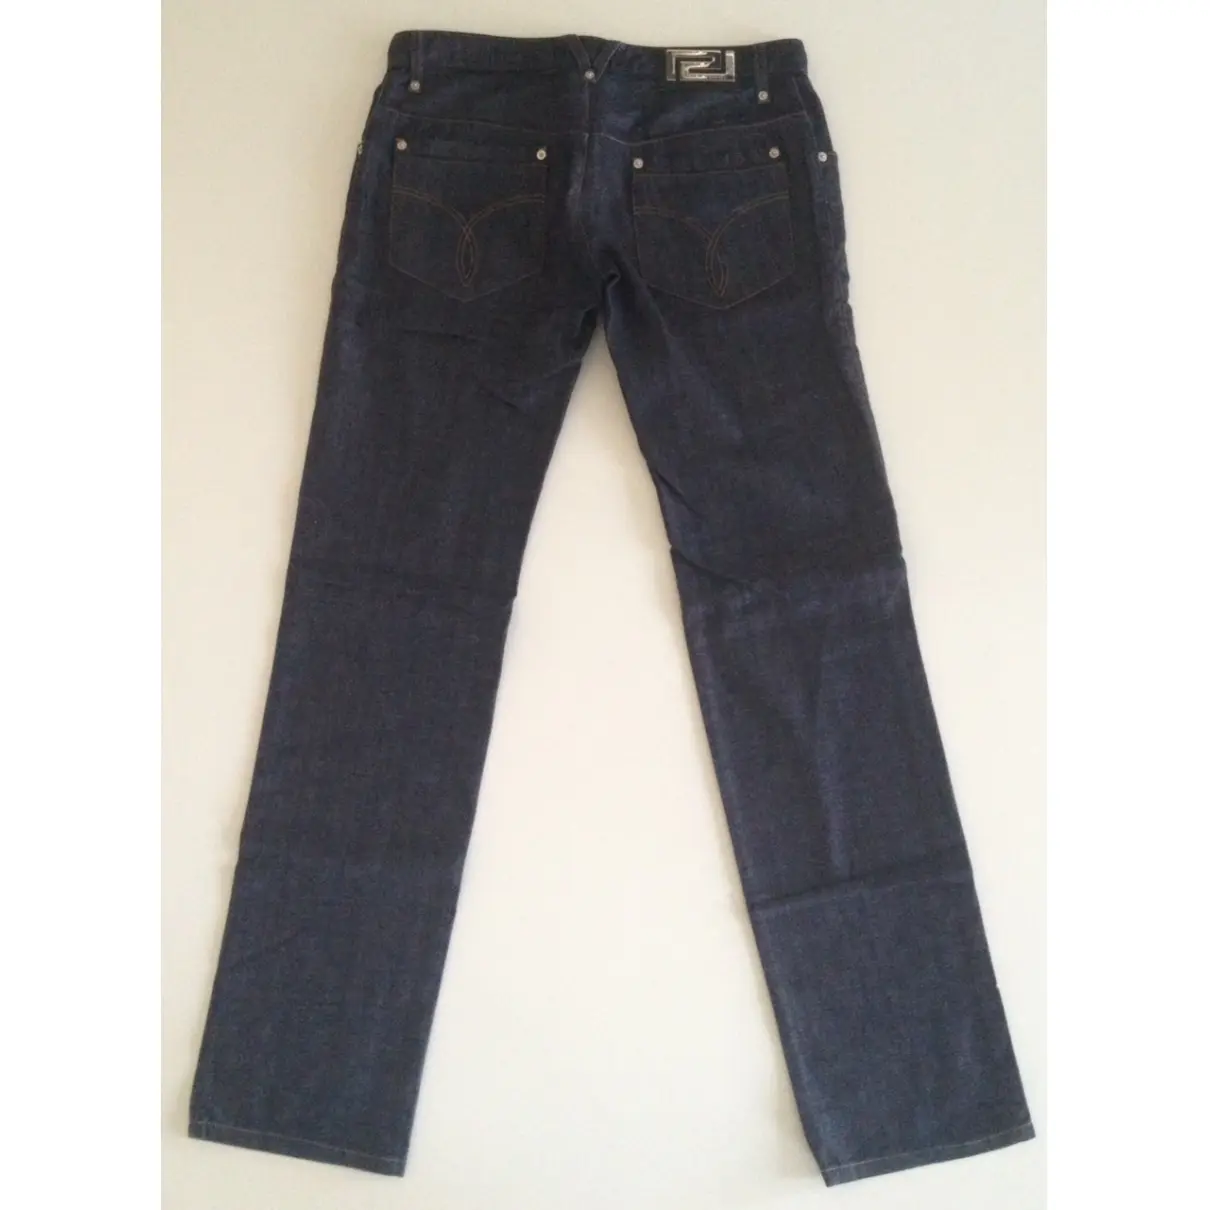 Gianni Versace Straight jeans for sale - Vintage